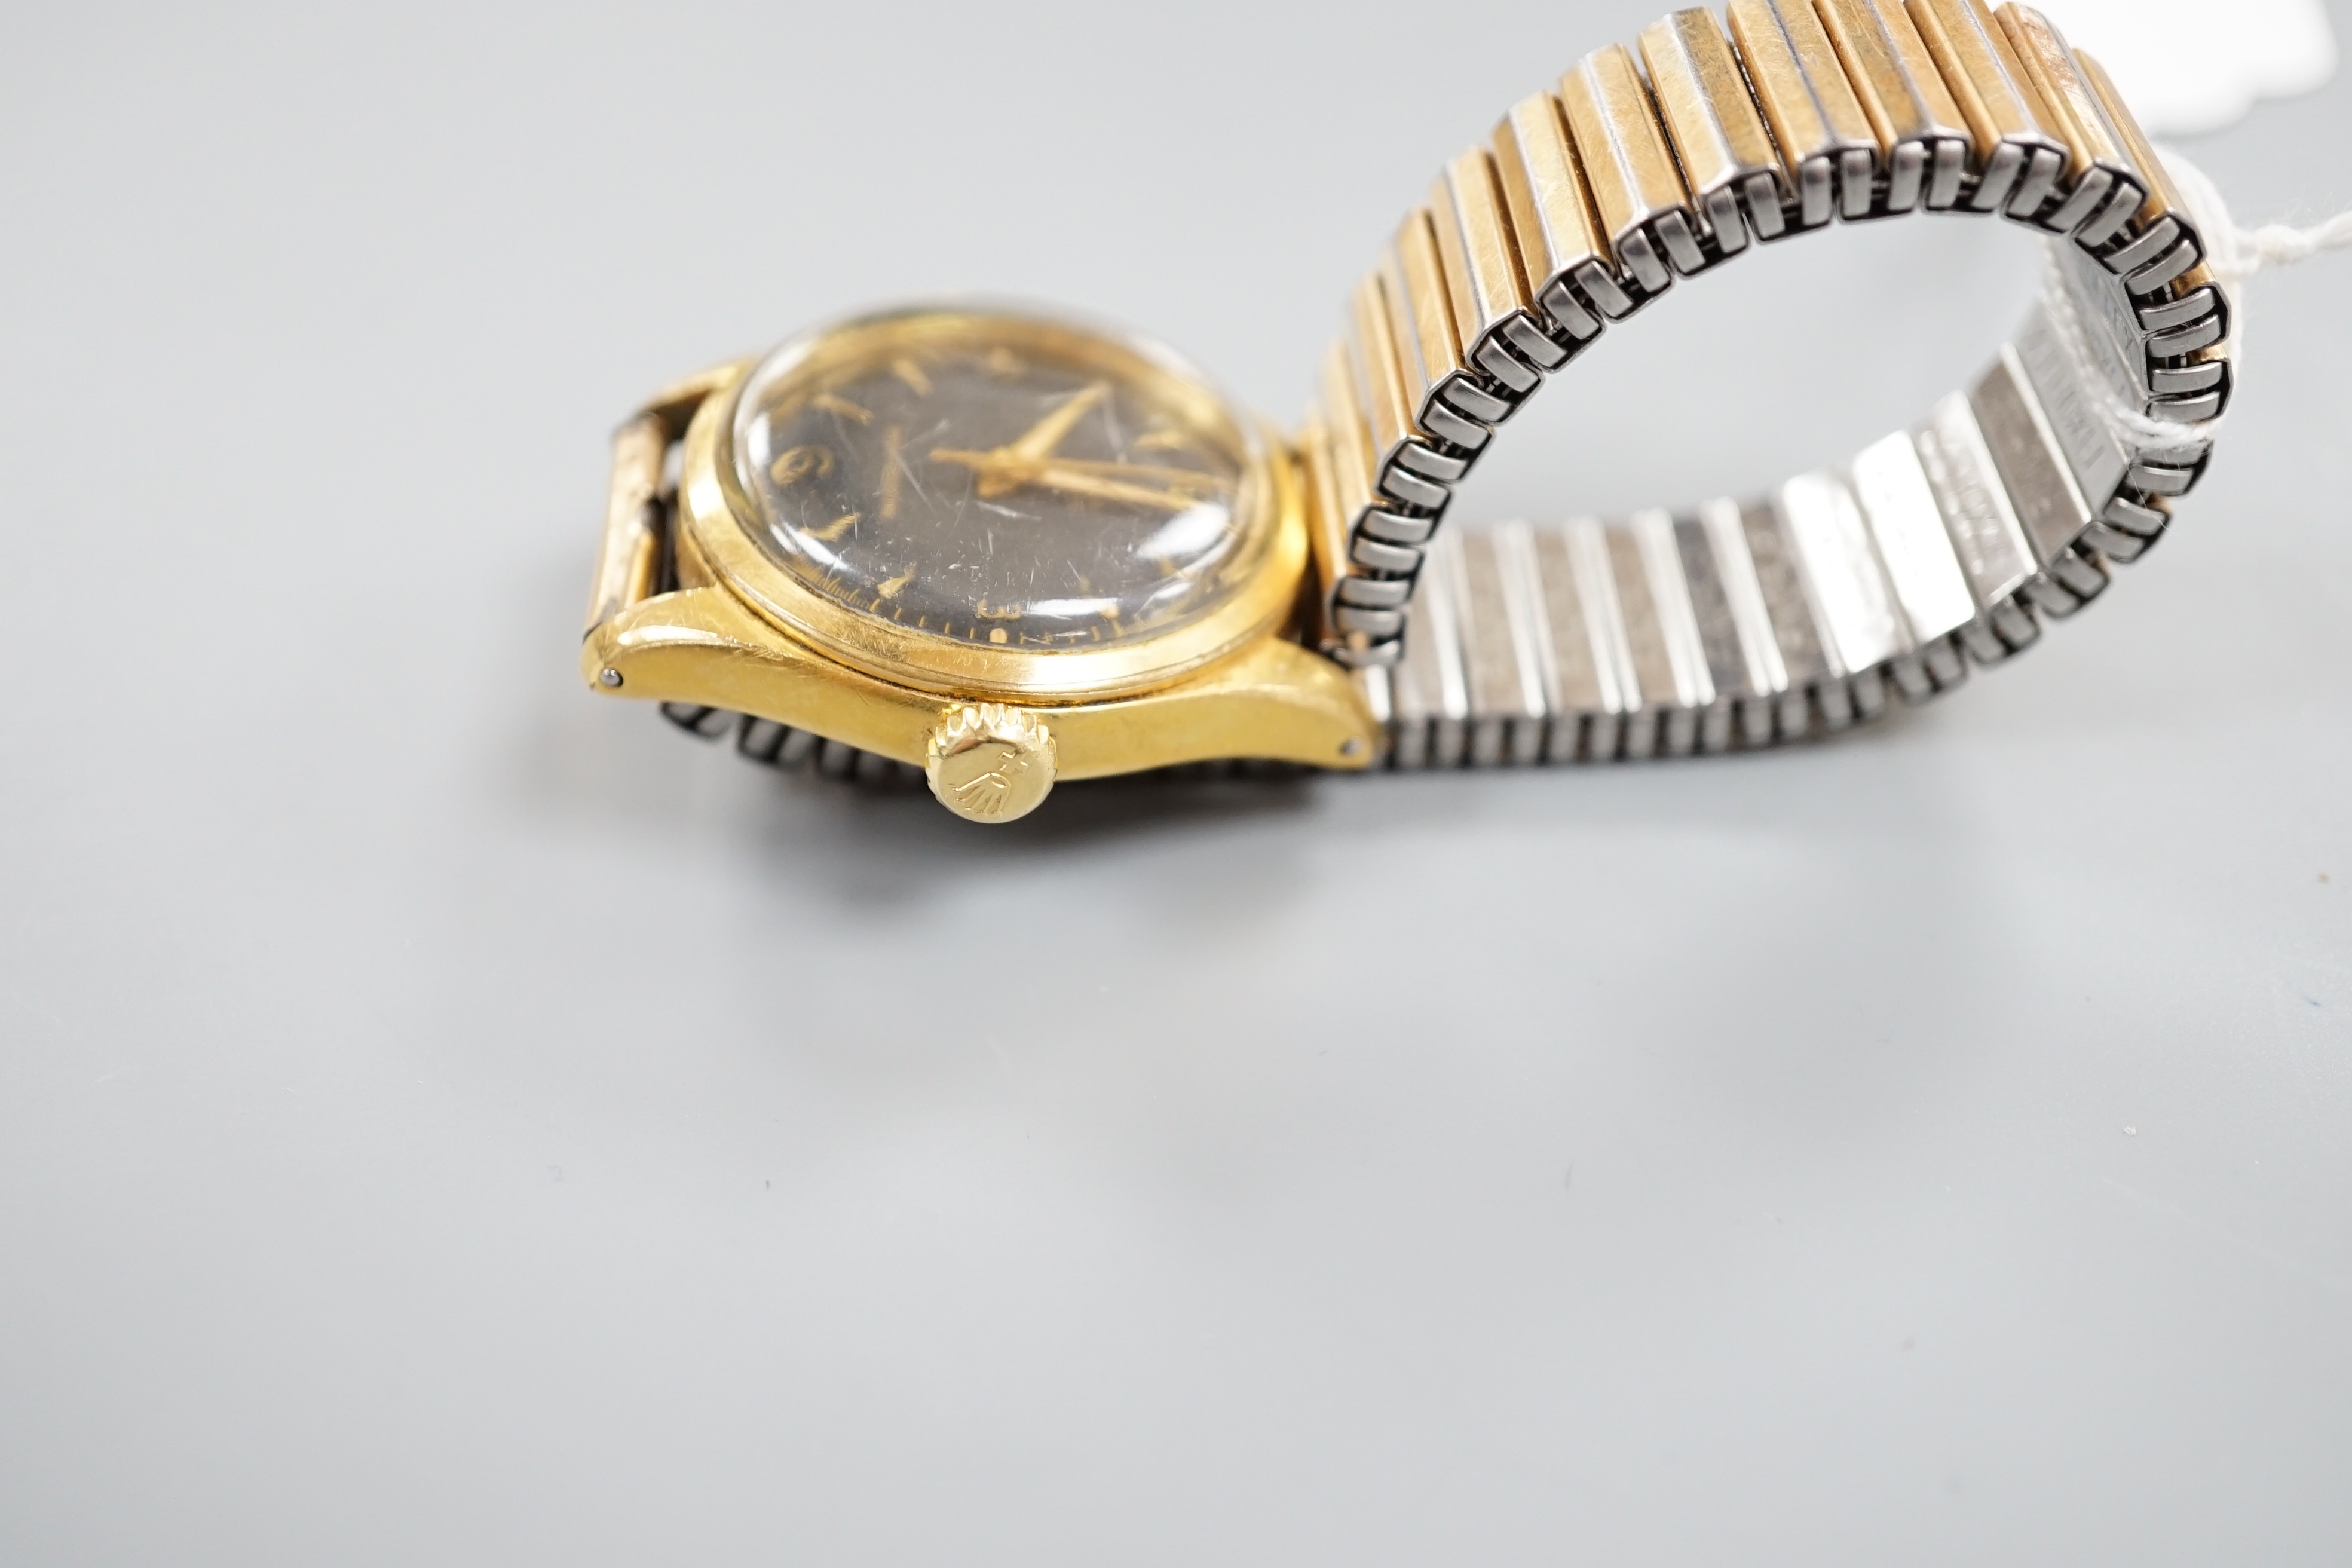 A gentleman's 1950's? mid-size steel and gold plated Tudor Oyster manual wind wrist watch, with black dial and associated strap, case diameter 33mm, no box or papers.